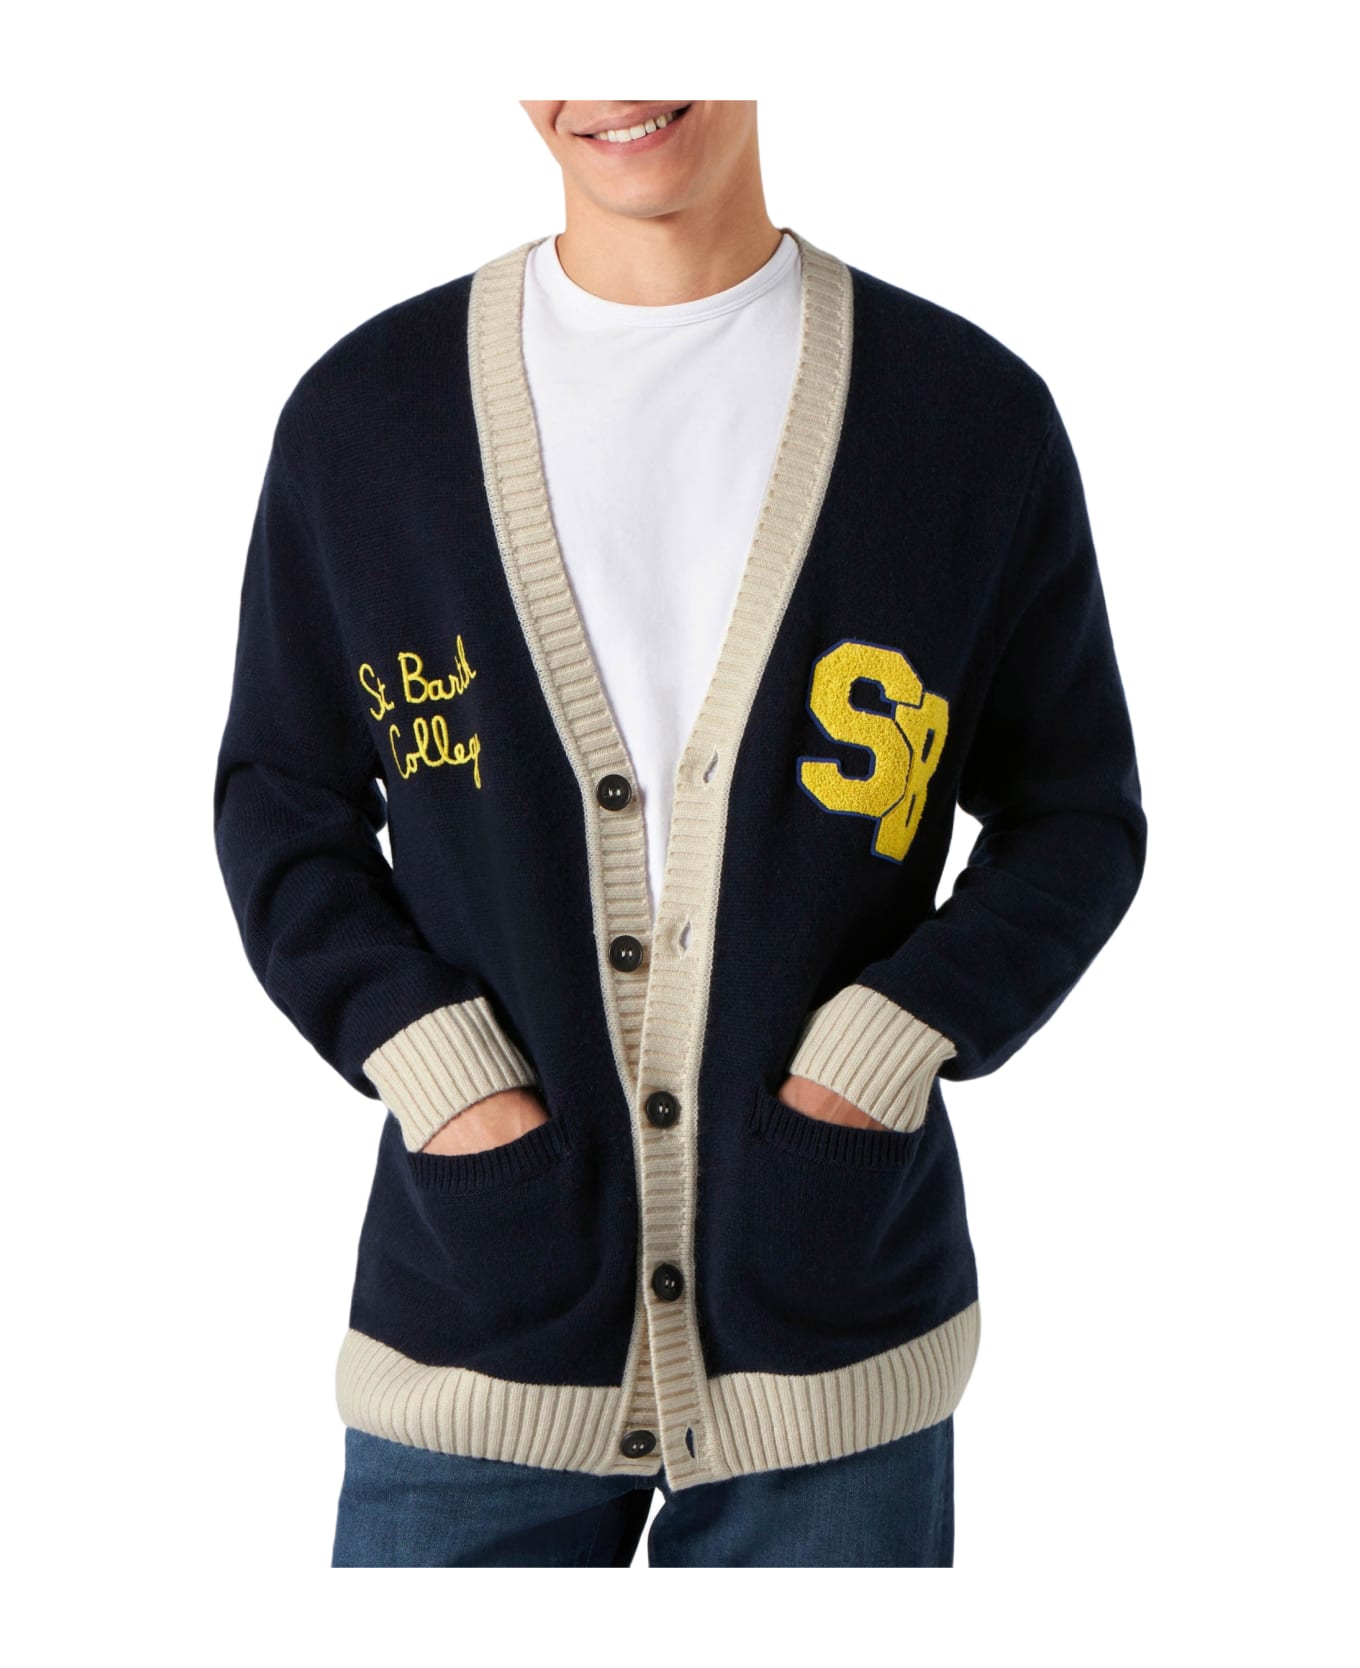 MC2 Saint Barth Knitted Cardigan With Patch And St. Barth College Embroidery - BLUE